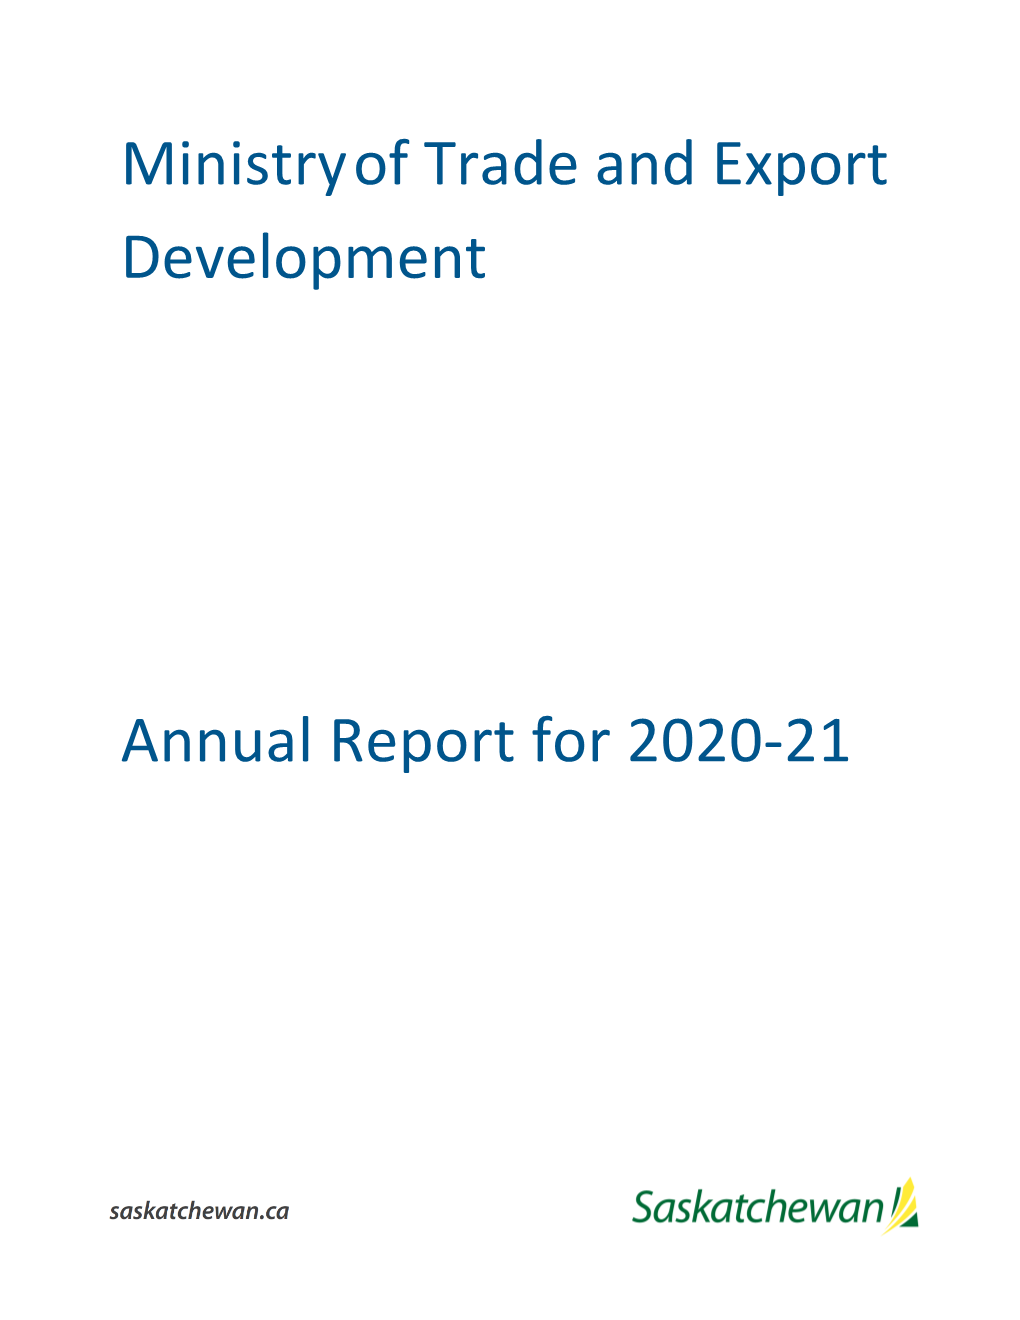 The Ministry of Trade and Export Development's 2020-21 Annual